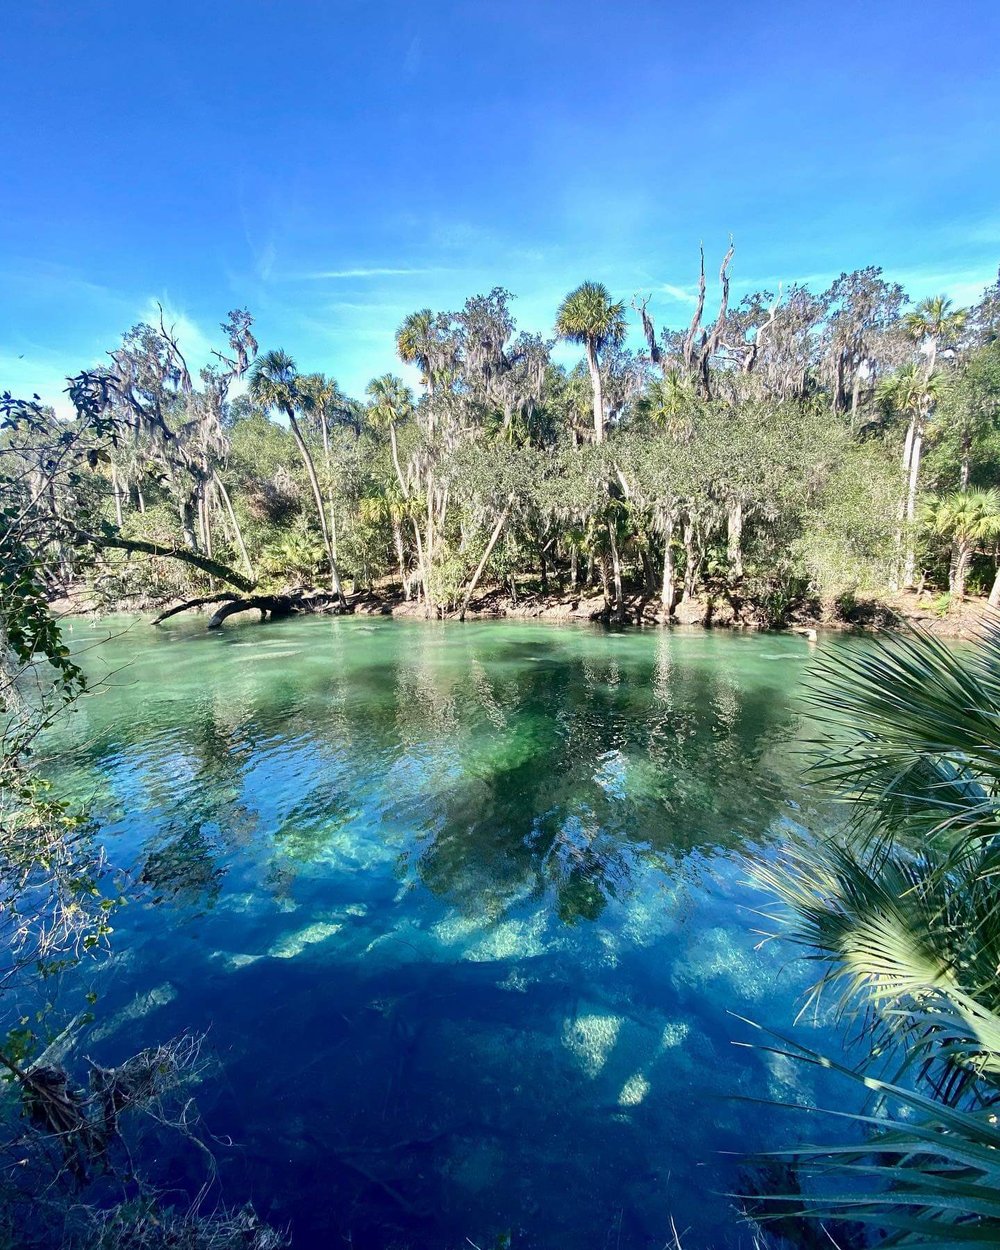 12 Natural Springs Near Miami for a Refreshing Dip in the Great